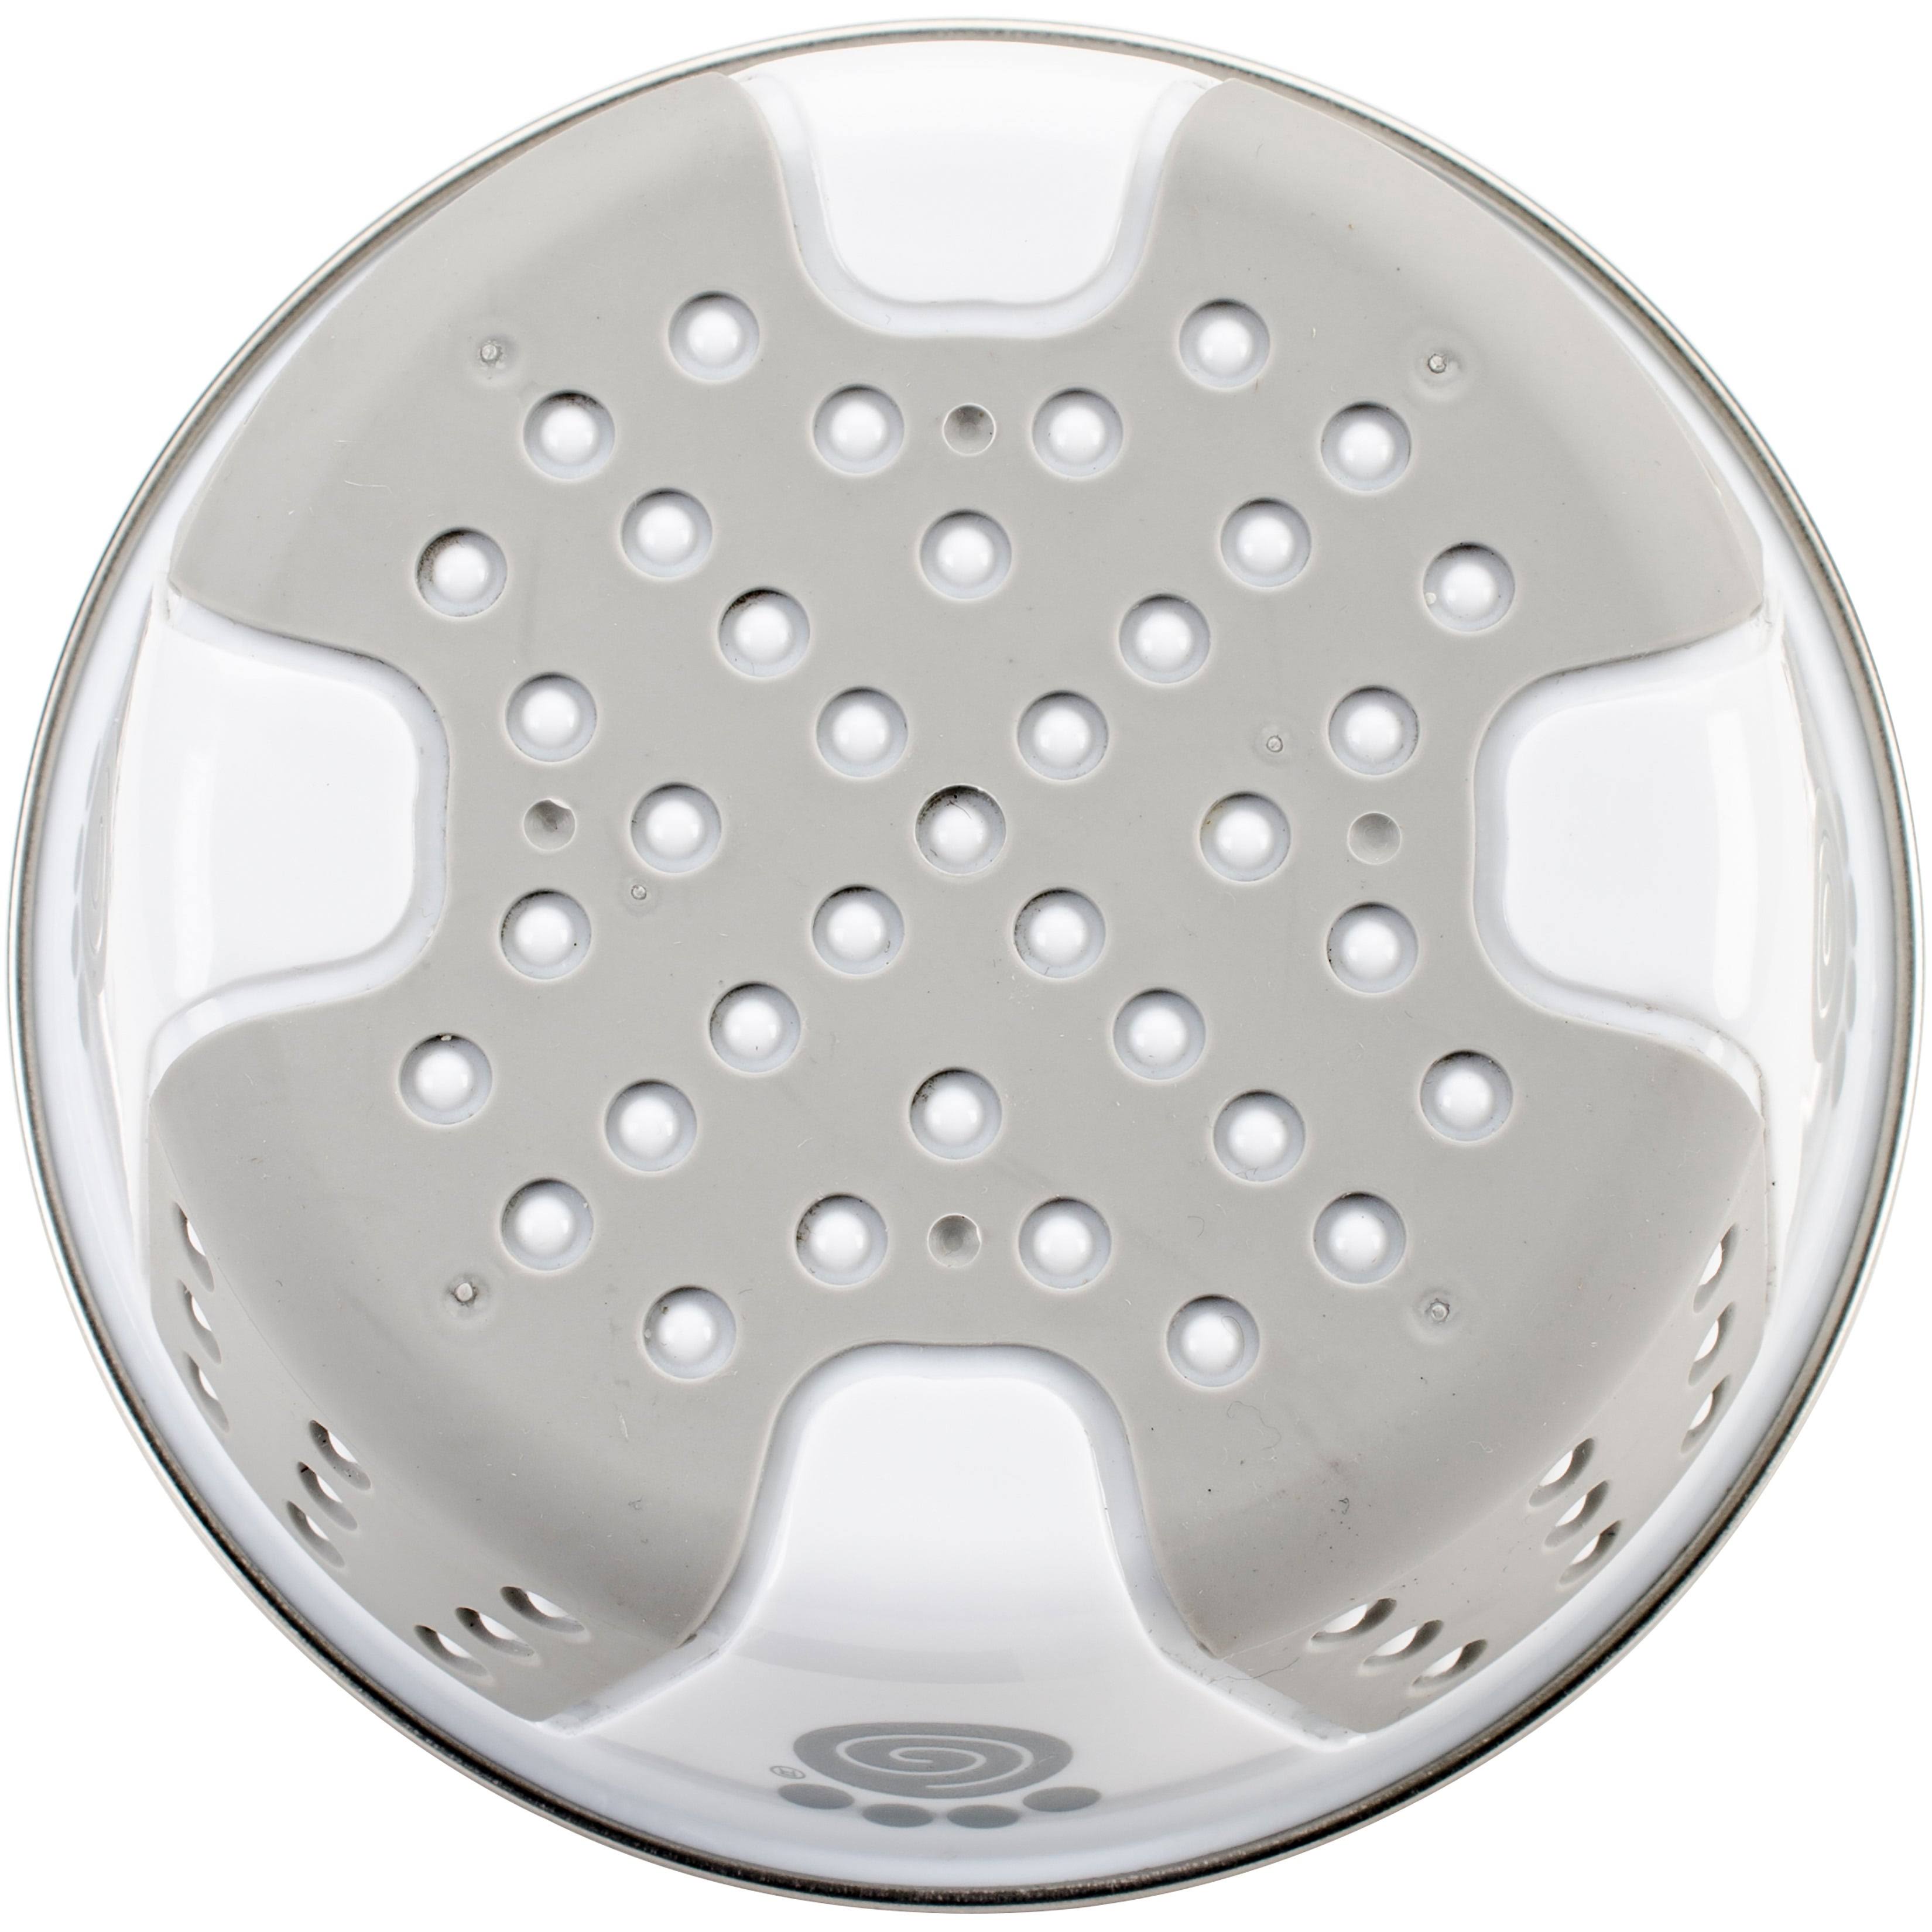 Petrageous Designs Bowl - Stainless Steel, Gray and White